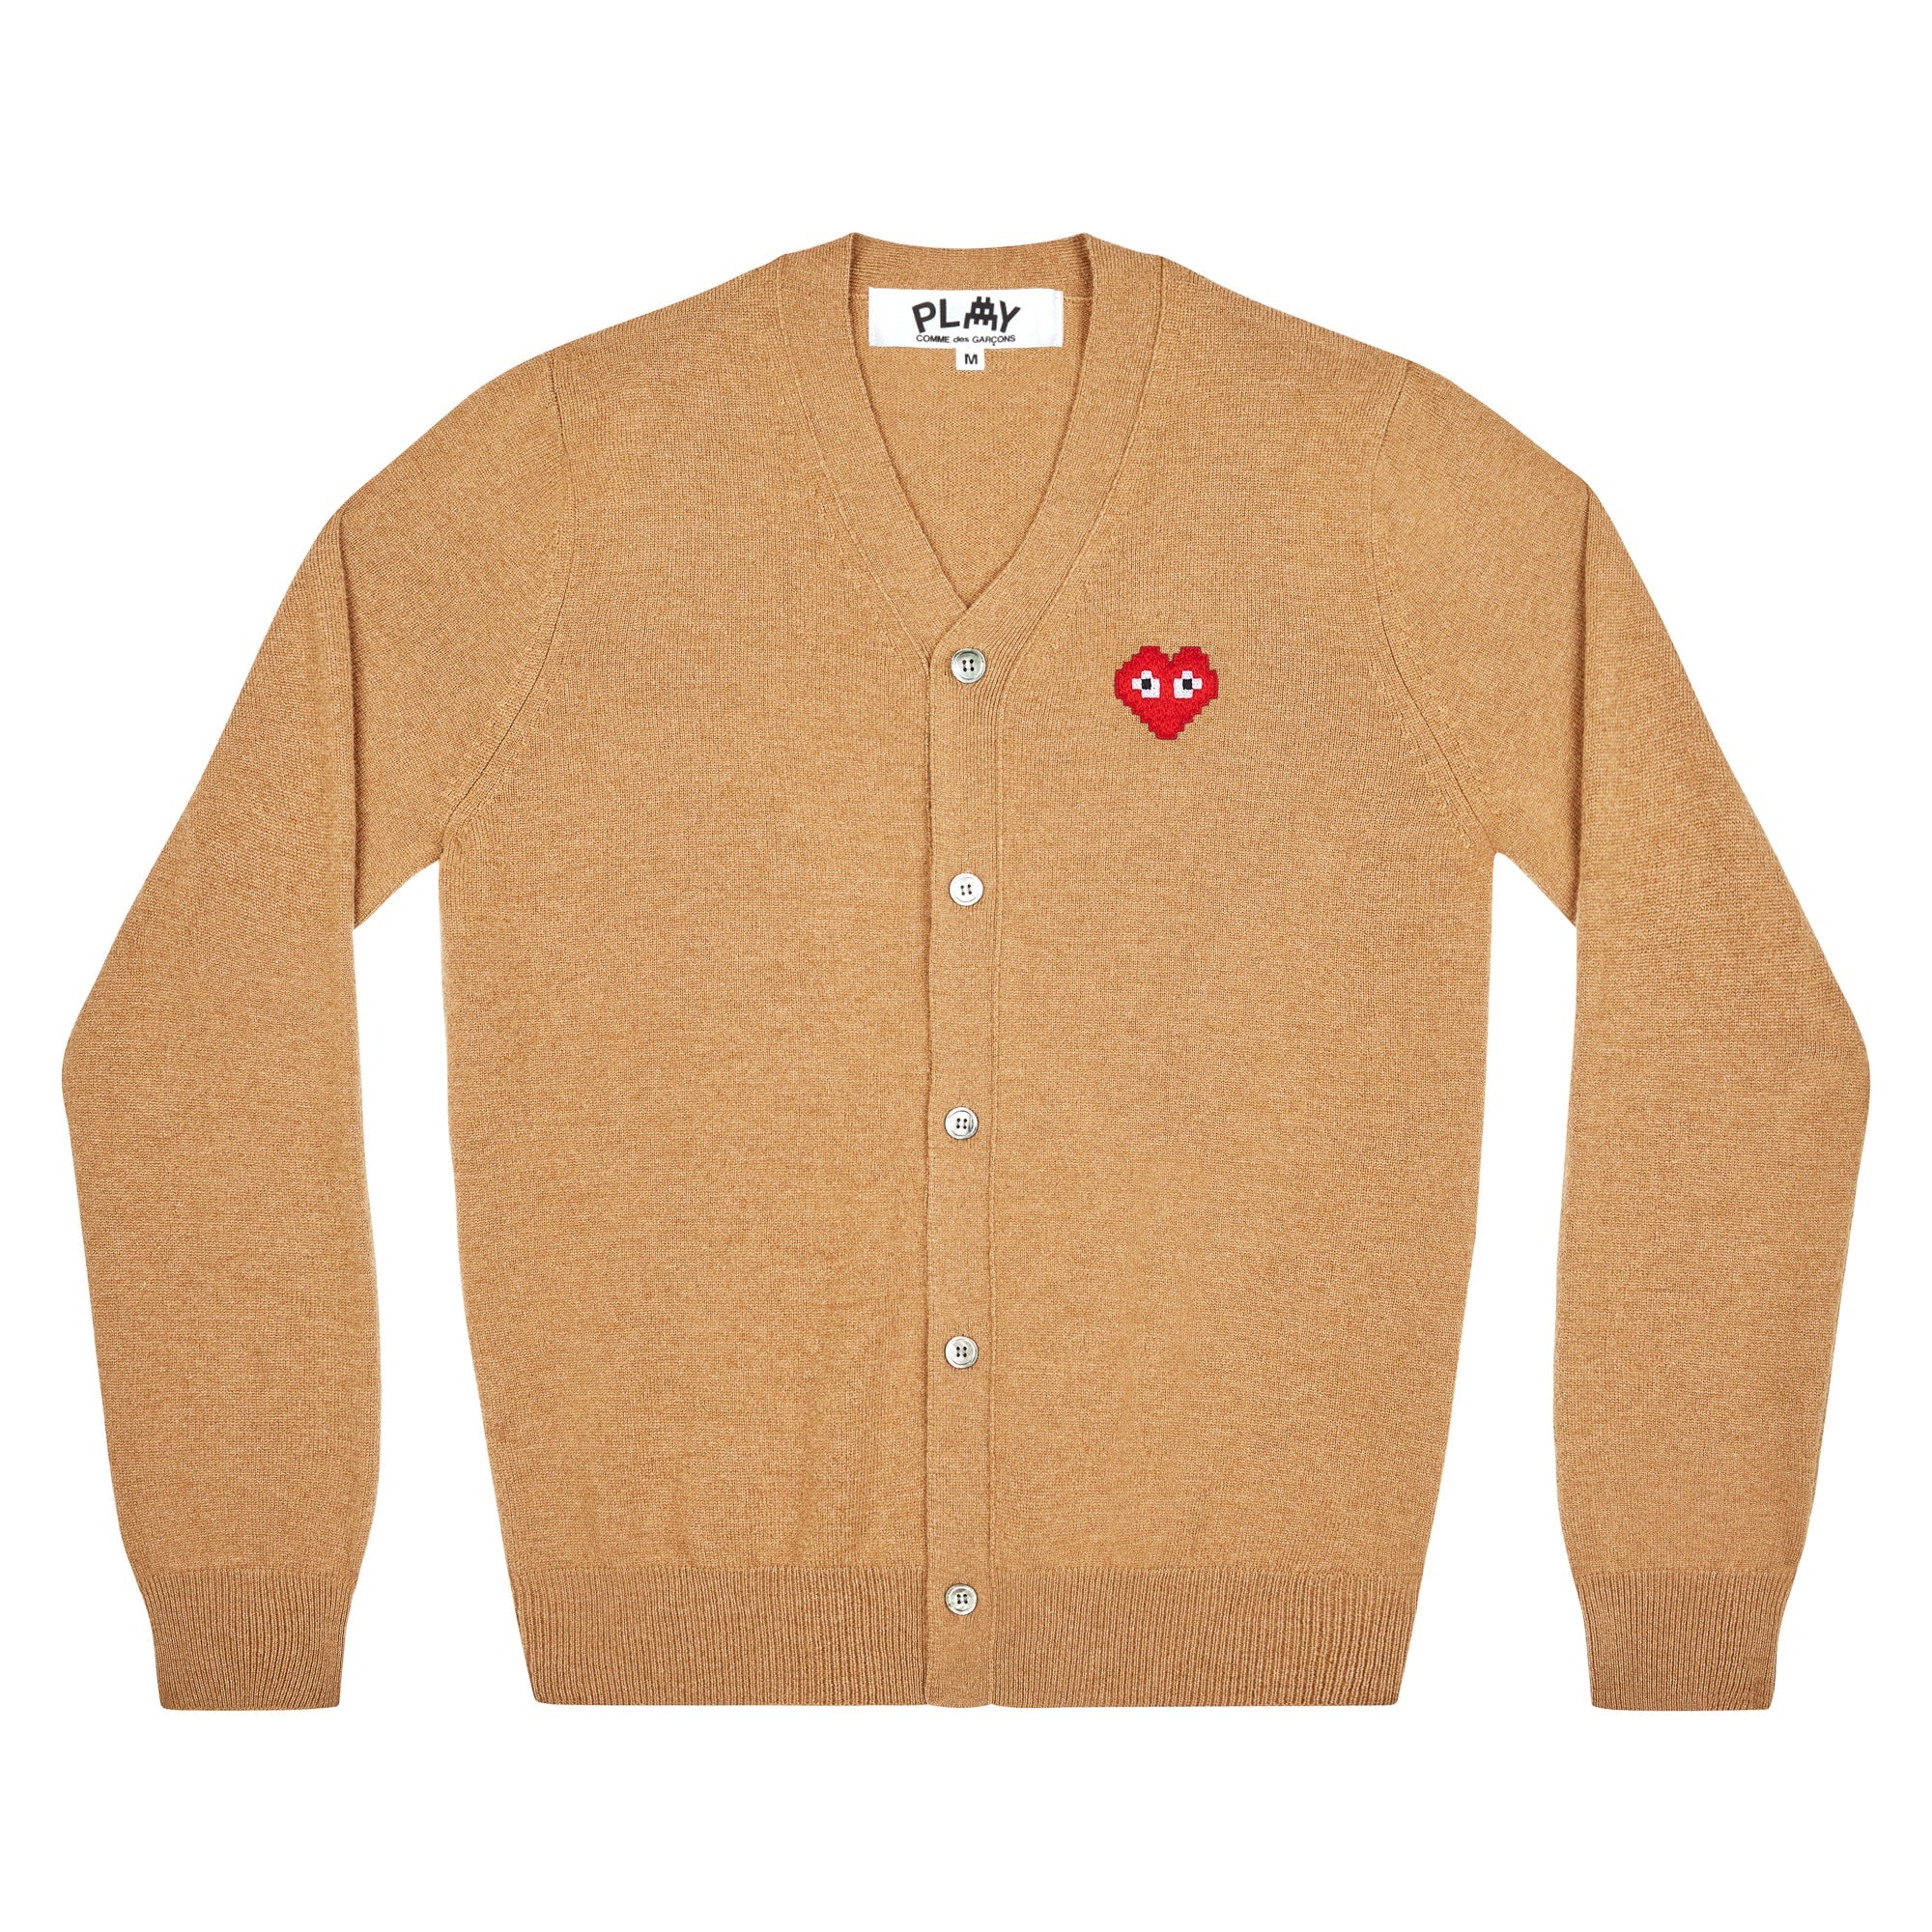 PLAY - the Artist Invader Men's Cardigan - (N084)(Camel) view 1